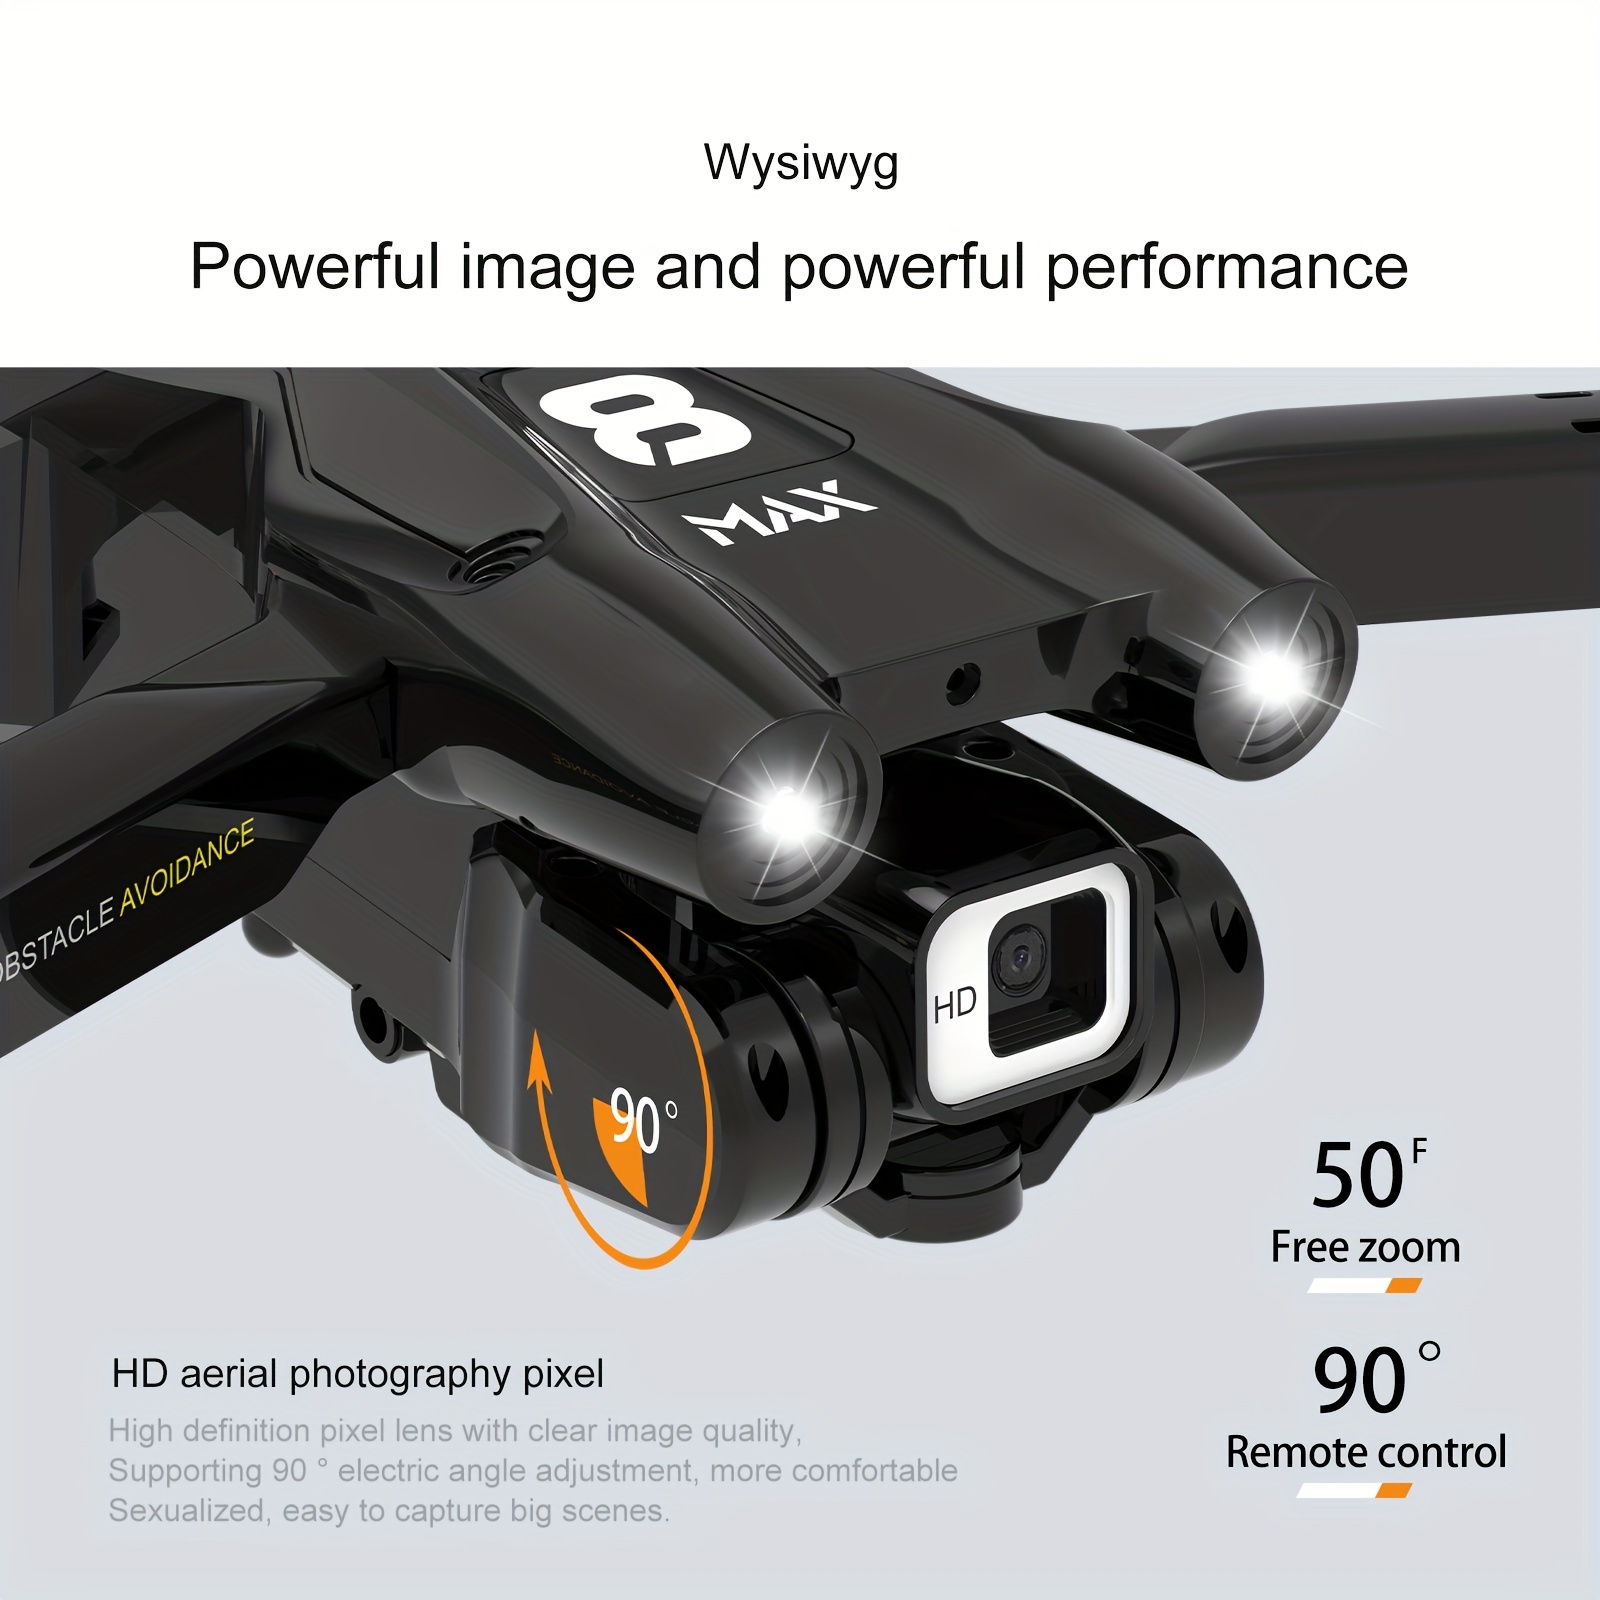 yt163 foldable drone remote control and app control easy to carry four sided sensor obstacle avoidance stable flight one key return high definition camera camera angle adjustable drone details 9